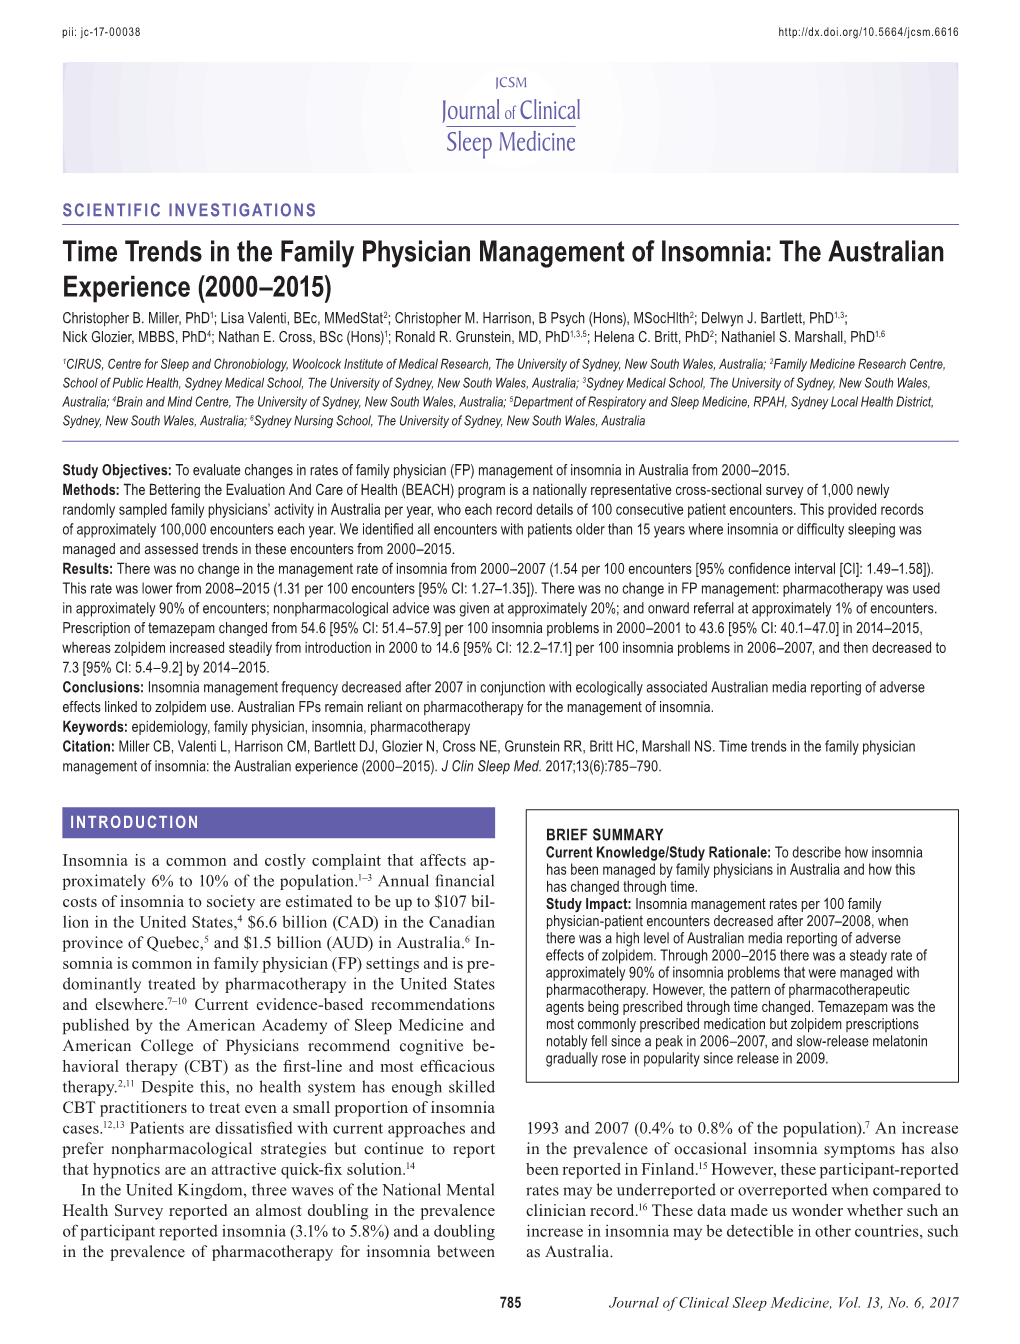 Time Trends in the Family Physician Management of Insomnia: the Australian Experience (2000–2015) Christopher B